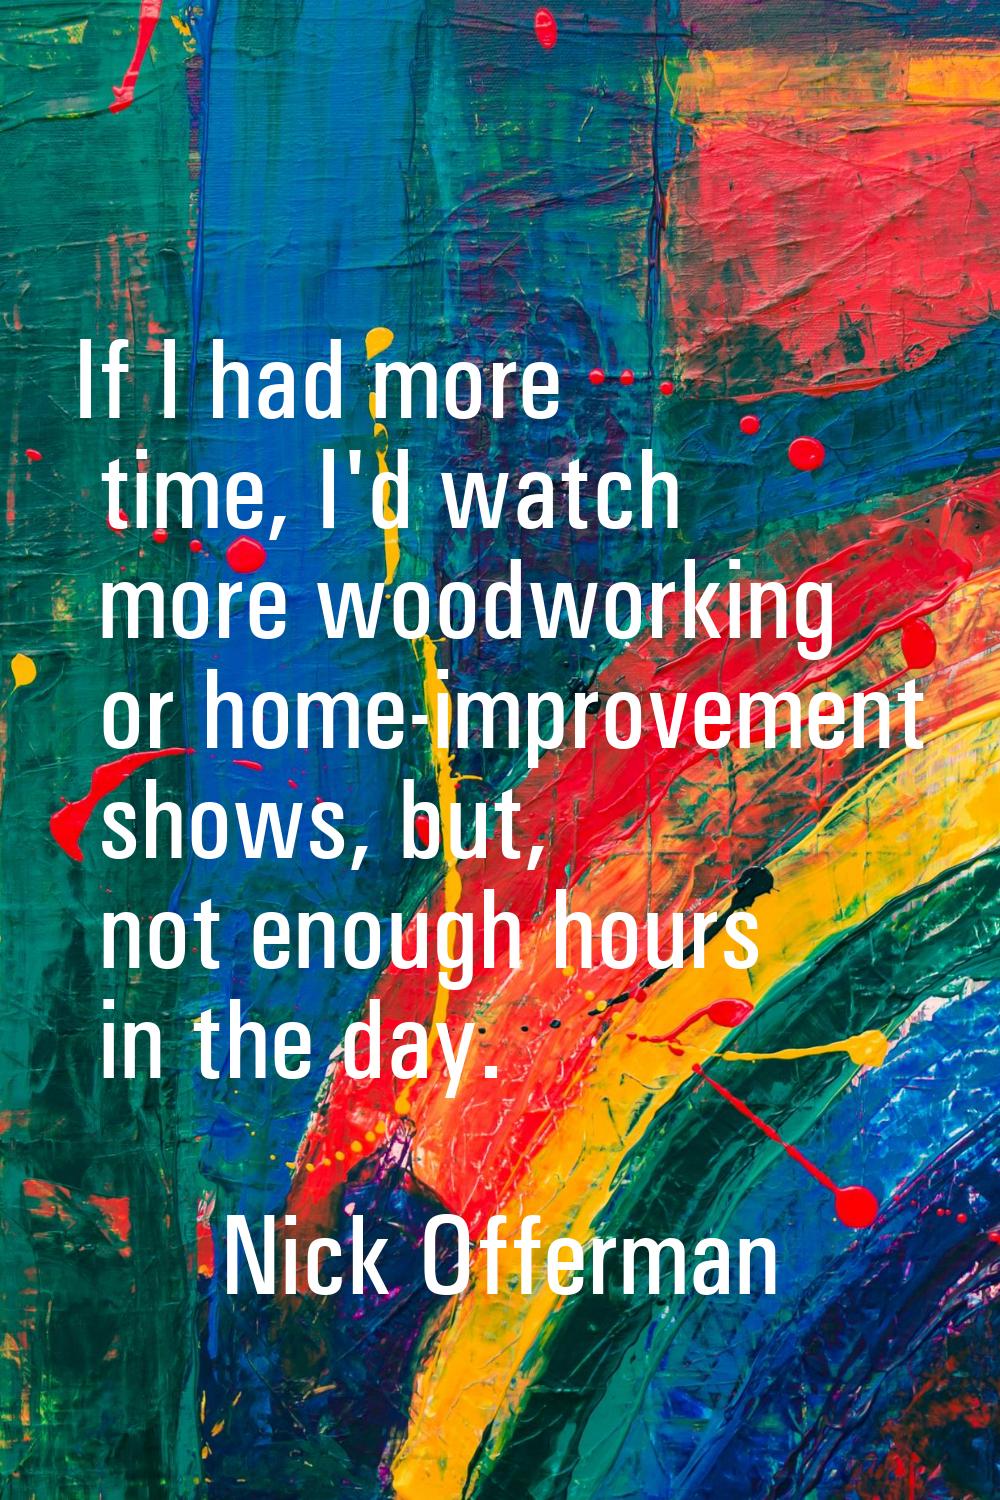 If I had more time, I'd watch more woodworking or home-improvement shows, but, not enough hours in 